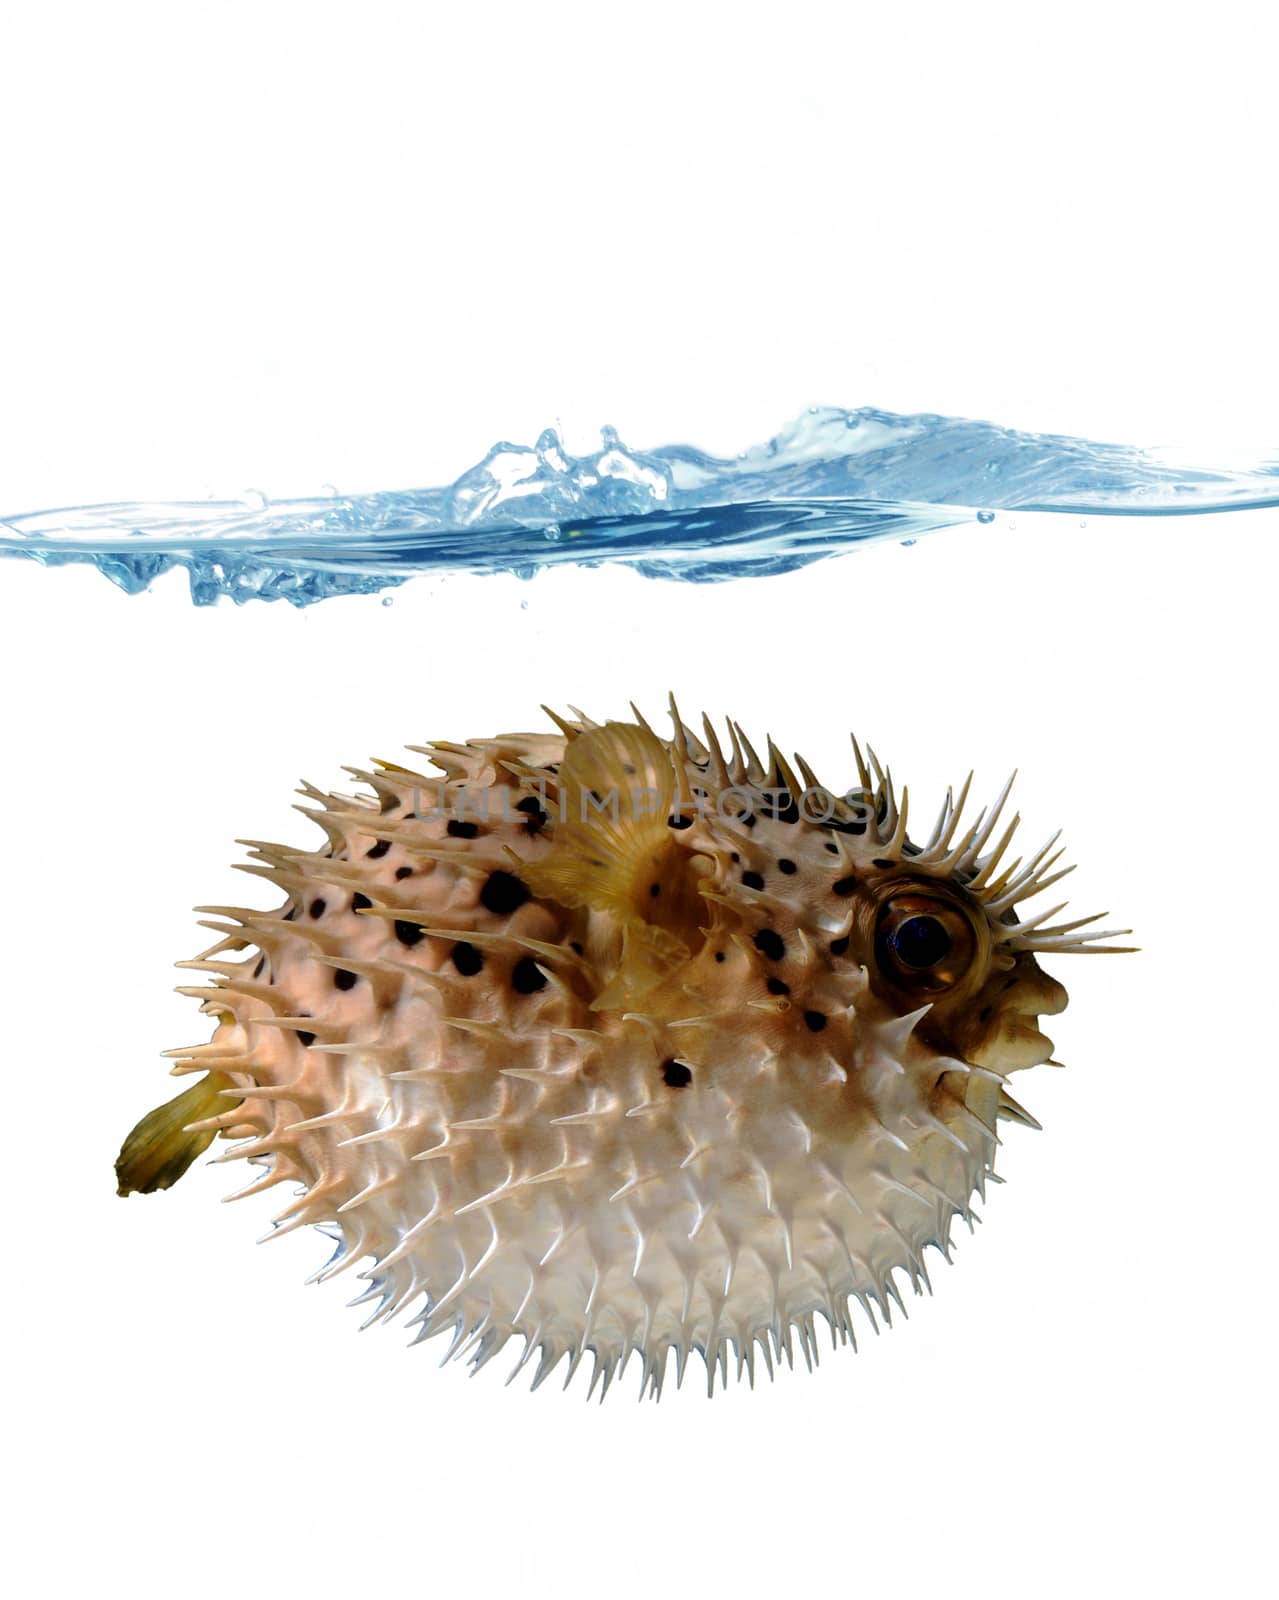 angry blowfish with a stream of water on a white background